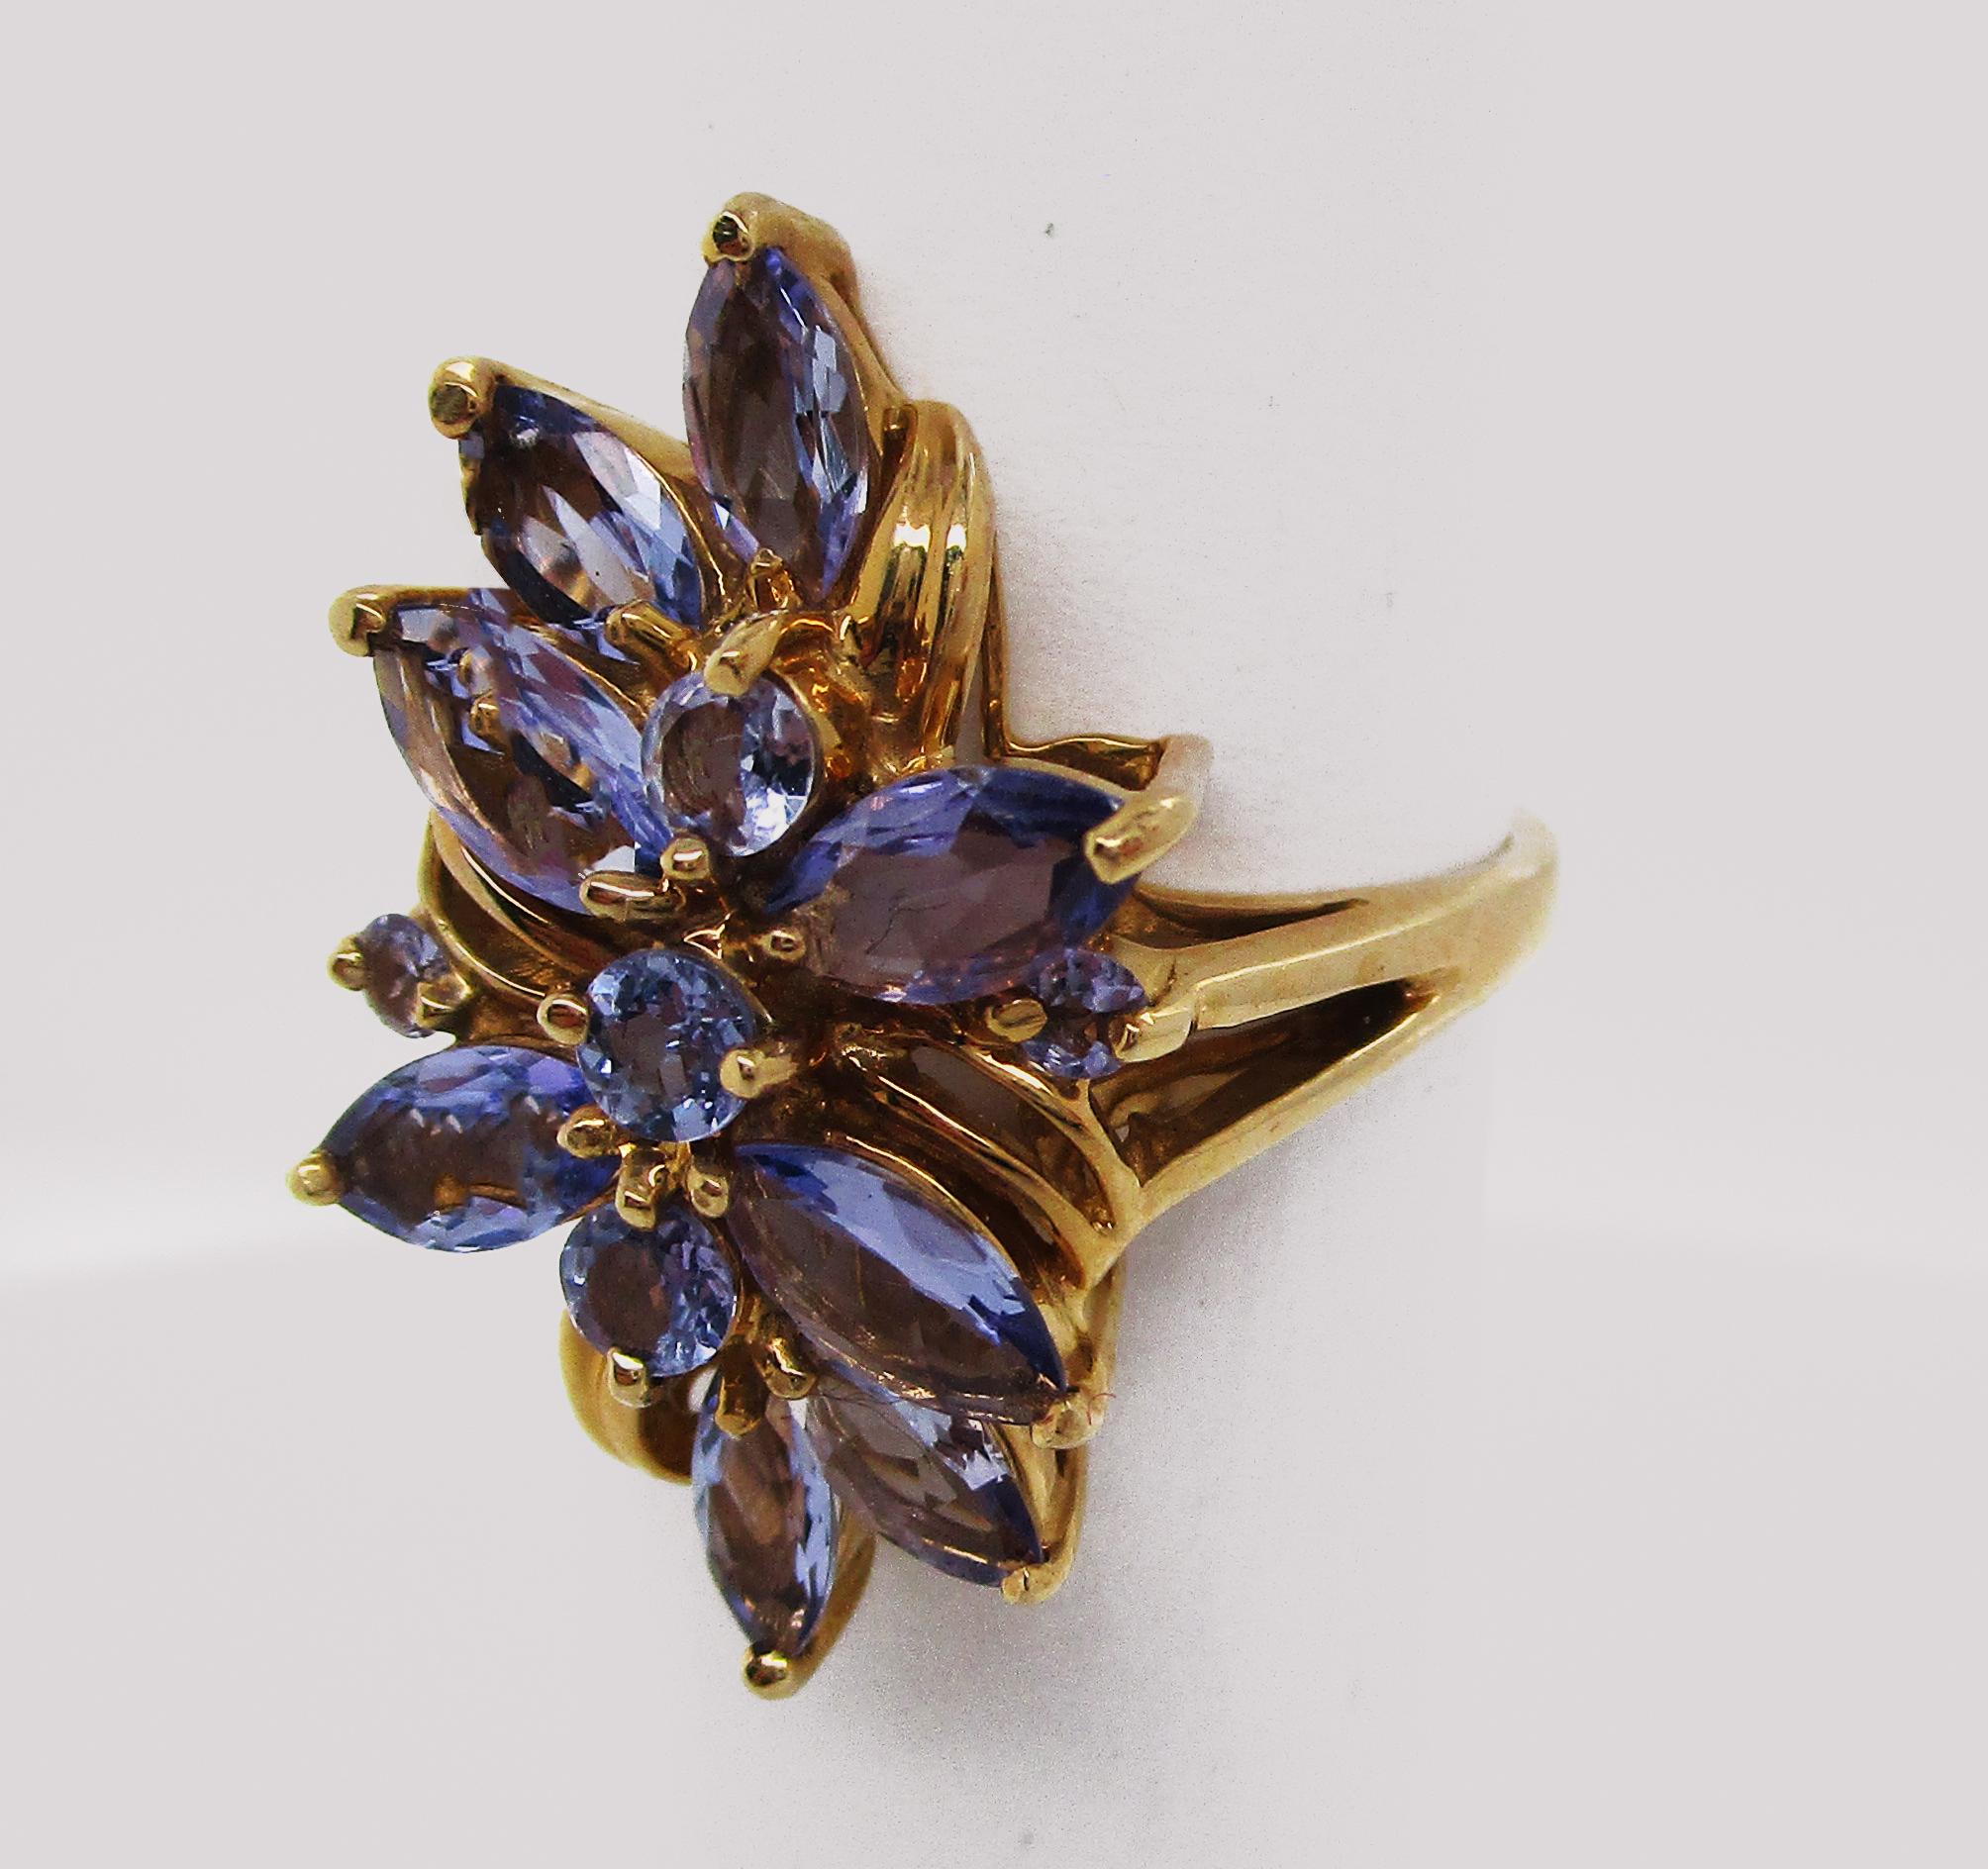 This is a fantastic ring in 14k yellow gold featuring a lovely array of tanzanite in an elegant waterfall design! The under gallery has an architectural look to it, making the ring light and sit excellently on the hand. The center of the ring